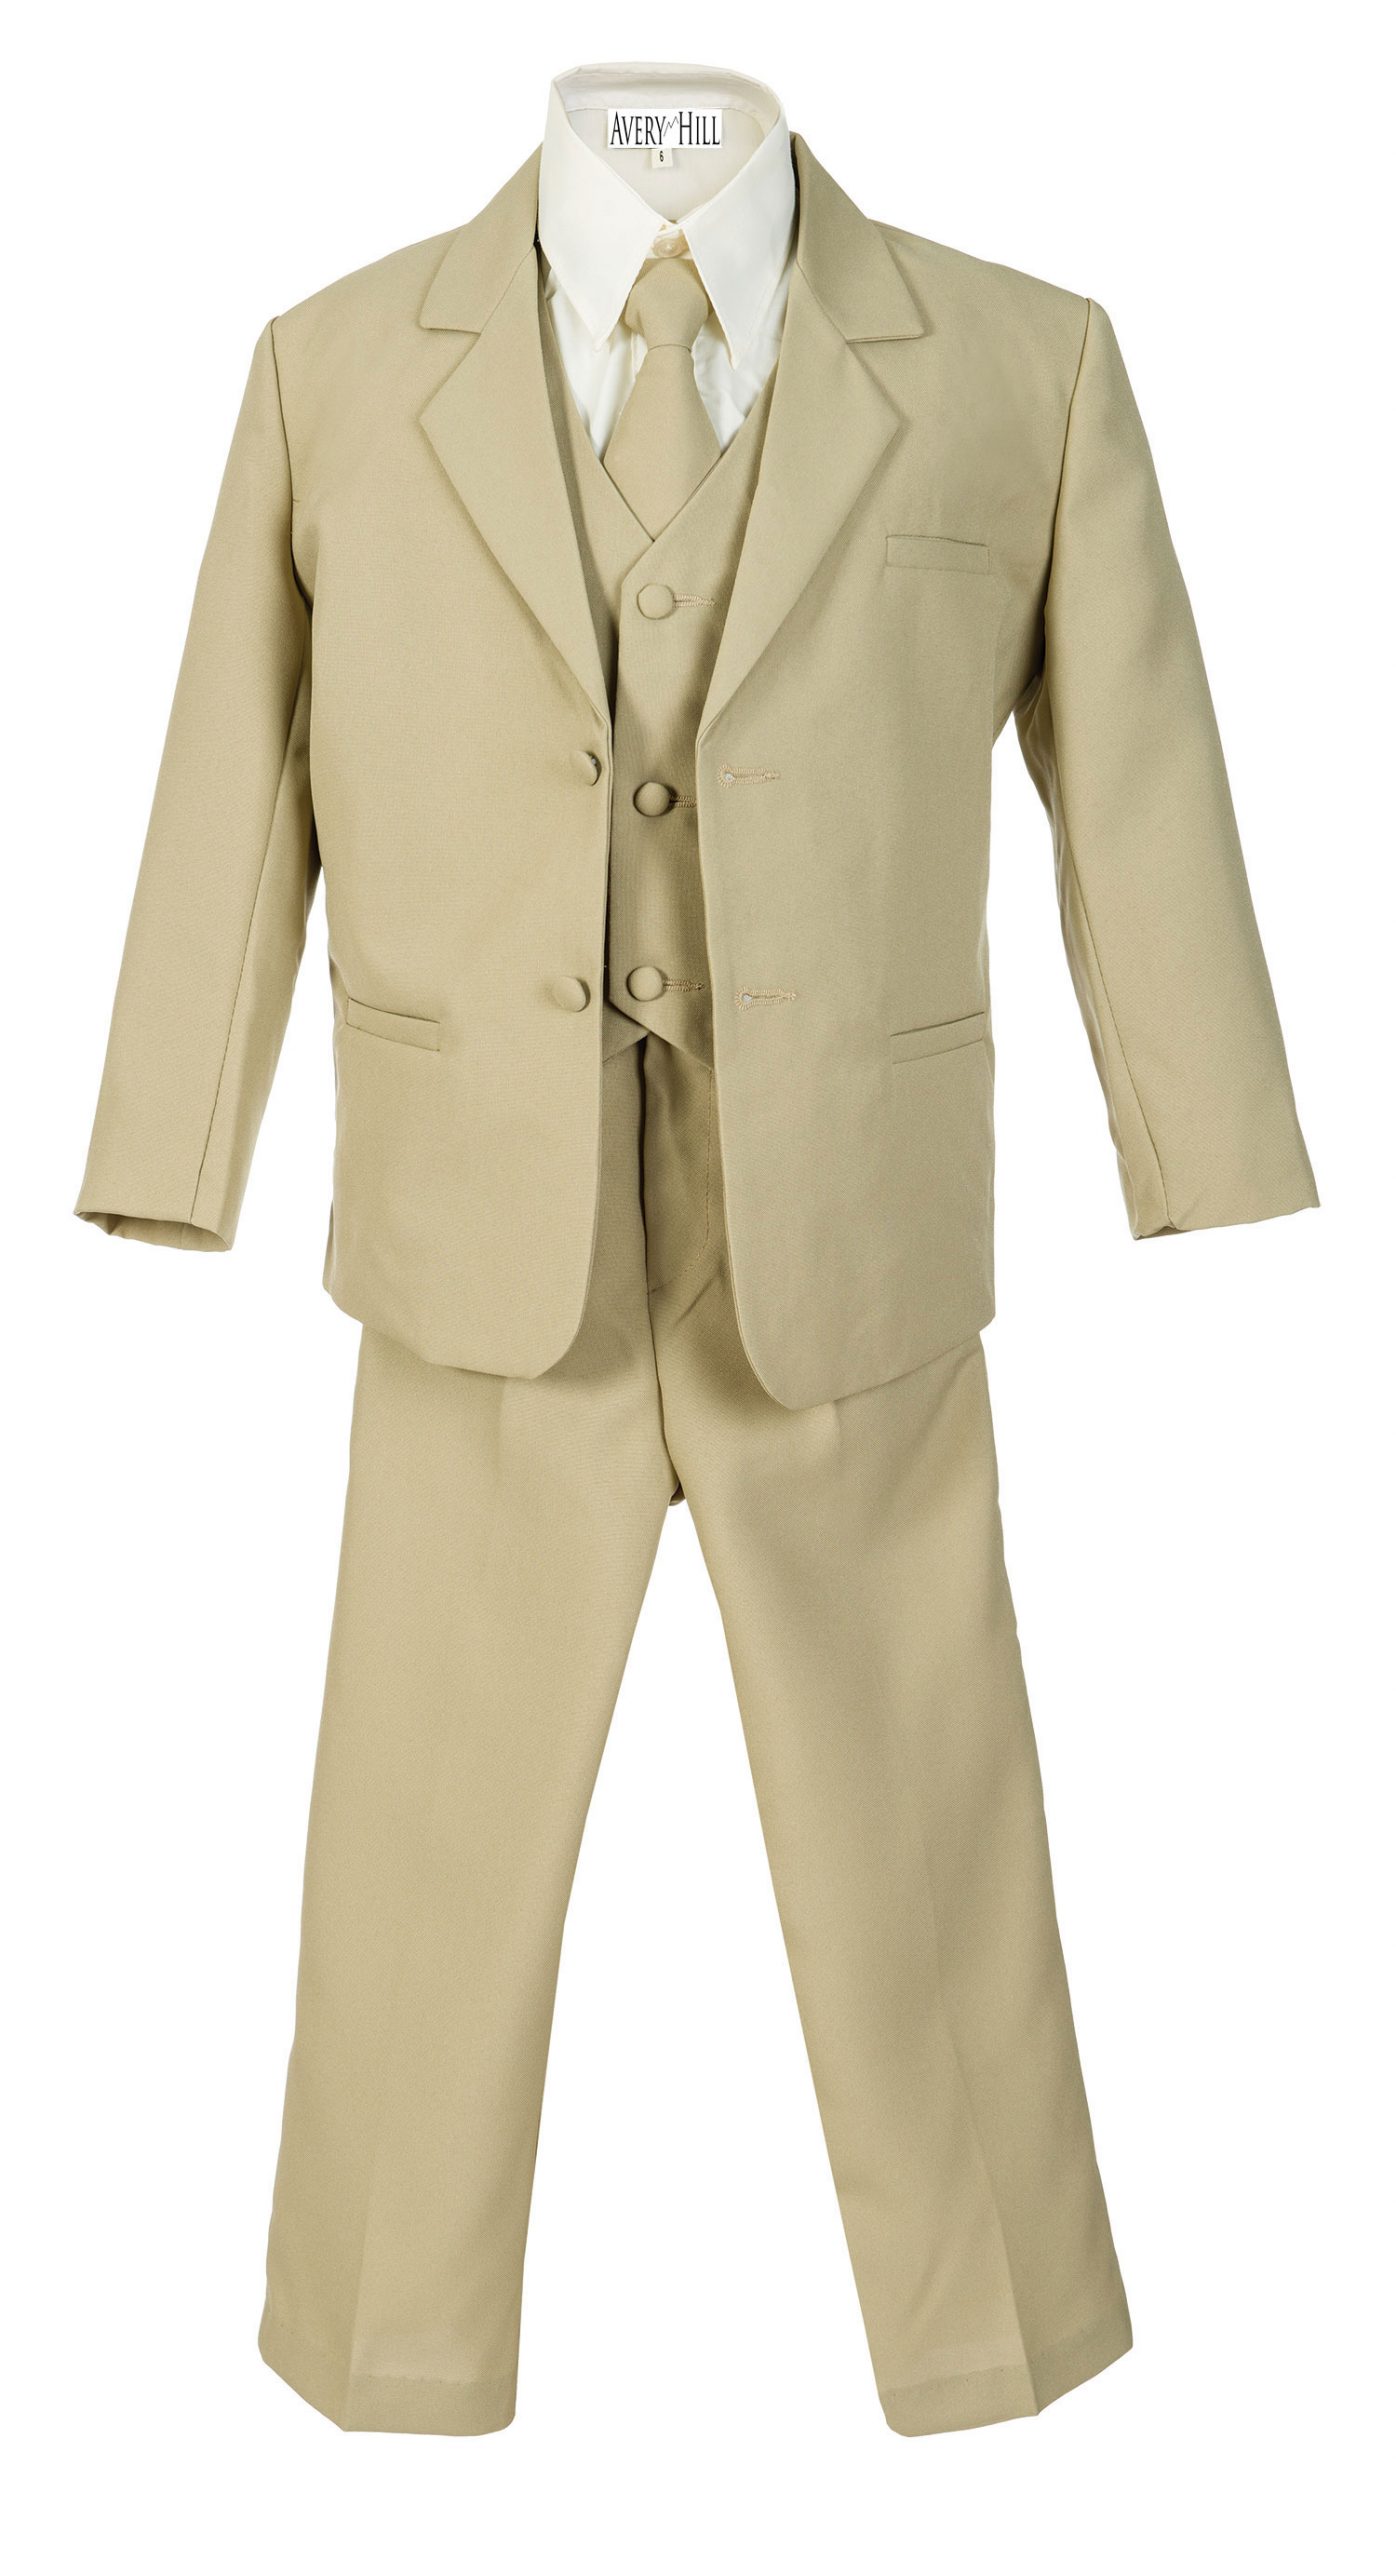 Avery Hill Boys Formal 5 Piece Suit with Shirt and Vest Khaki - M